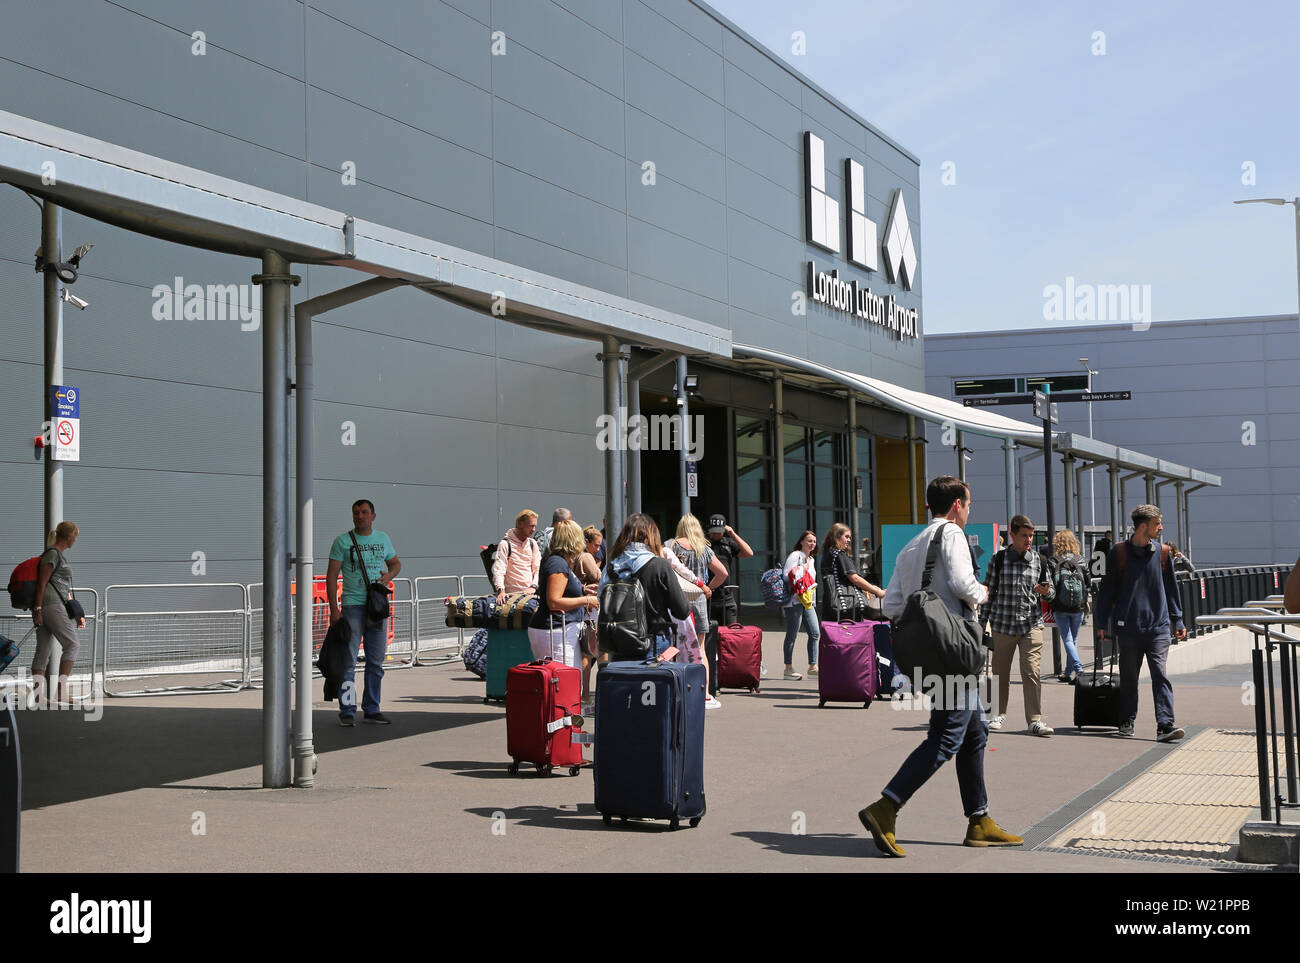 London Luton Airport, UK. Passengers with baggage approach the entrance of the new terminal building. Shows the new airport logo above. Stock Photo